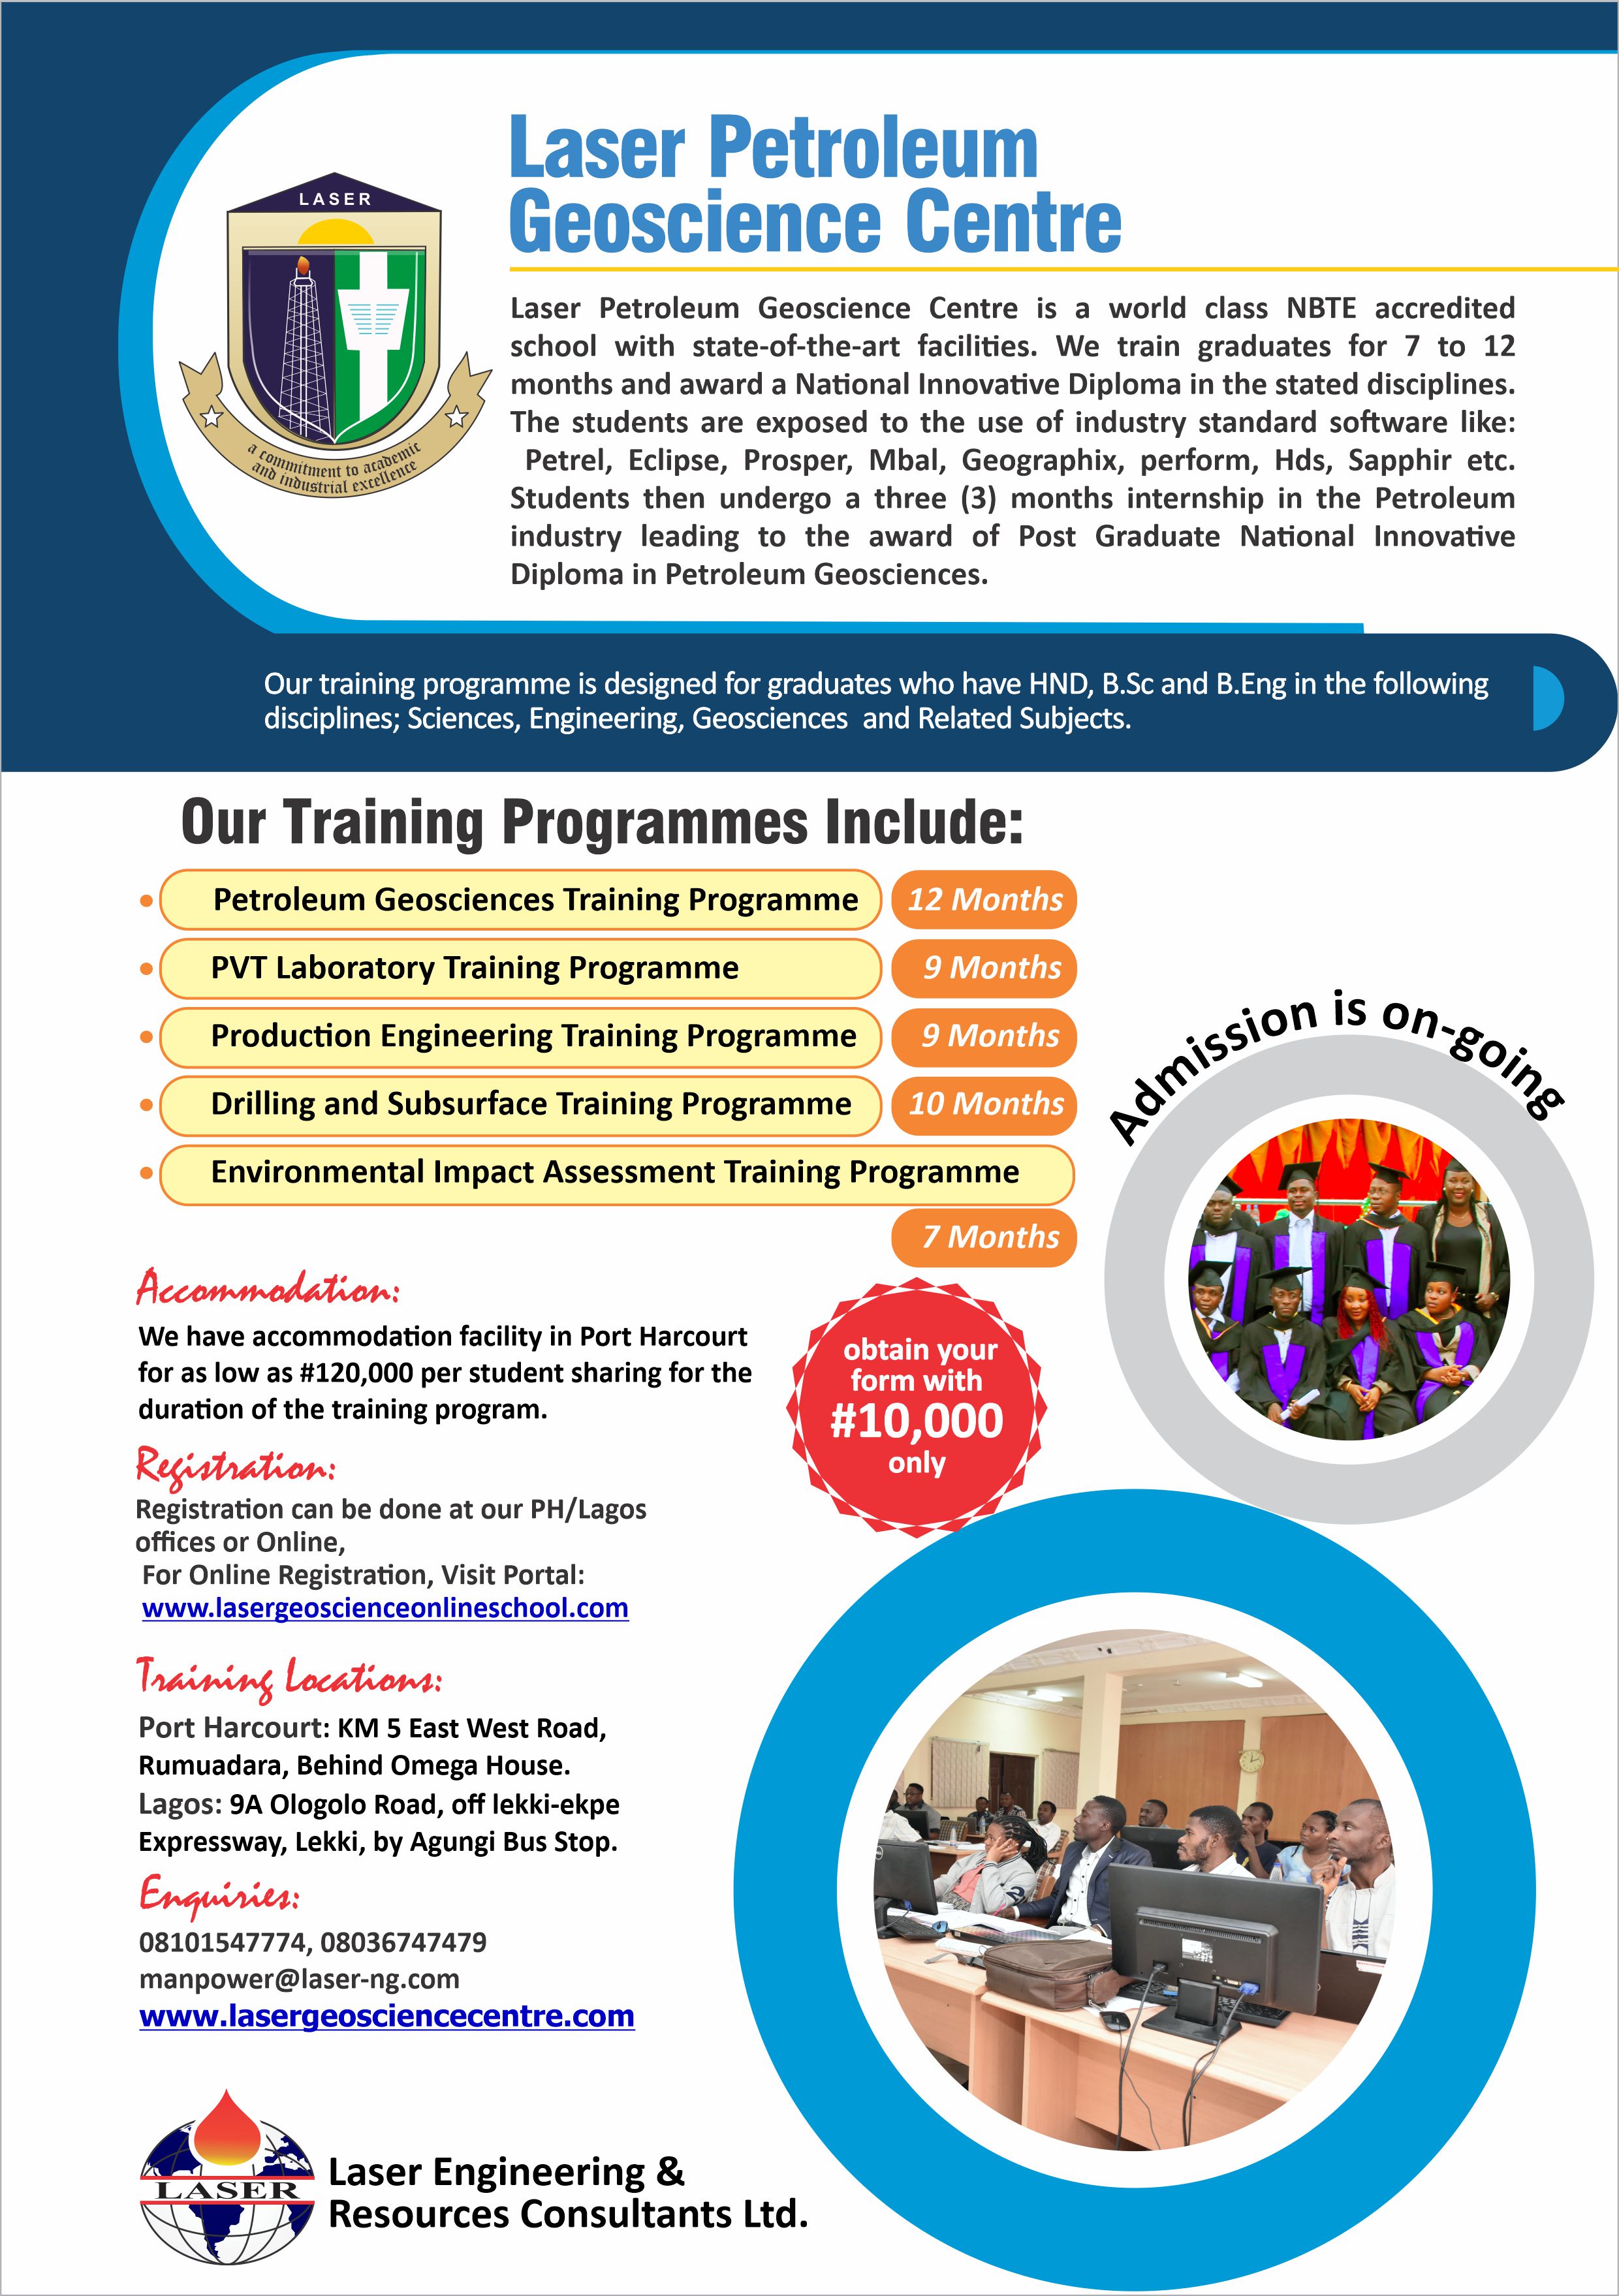 OUR VARIOUS TRAINING PROGRAMMES